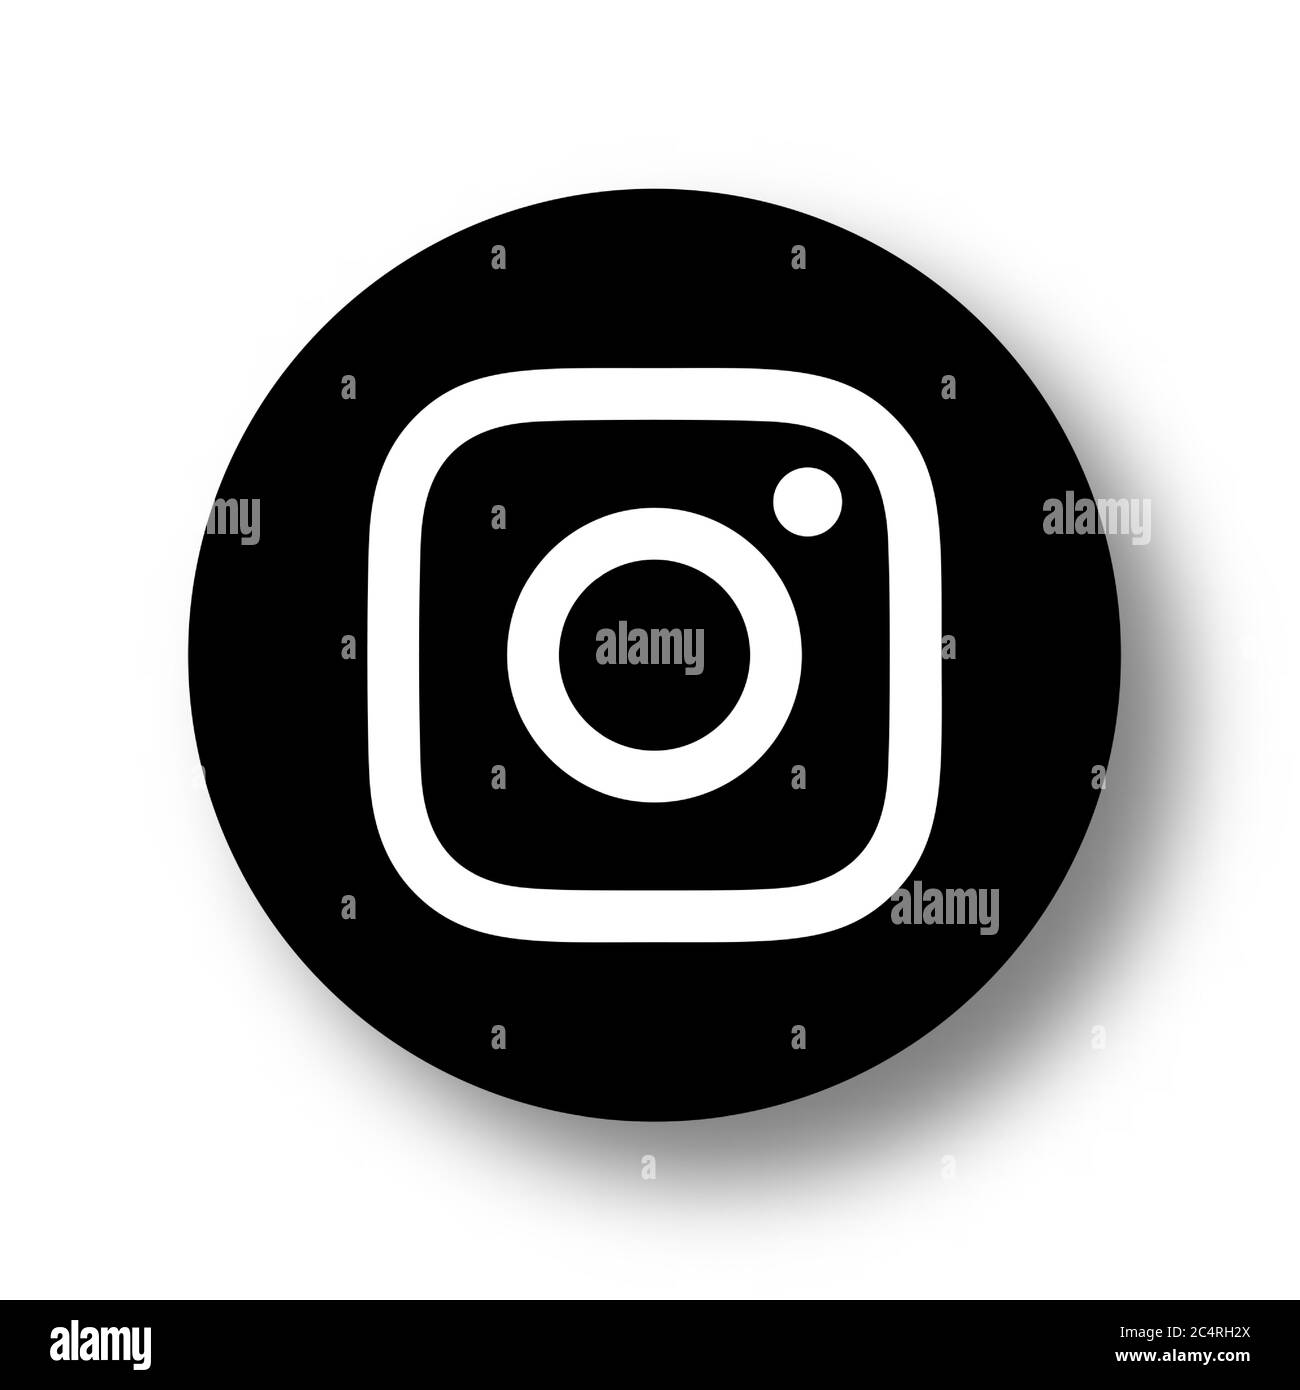 VORONEZH, RUSSIA - JANUARY 31, 2020: Instagram logo black round icon with soft shadow Stock Vector